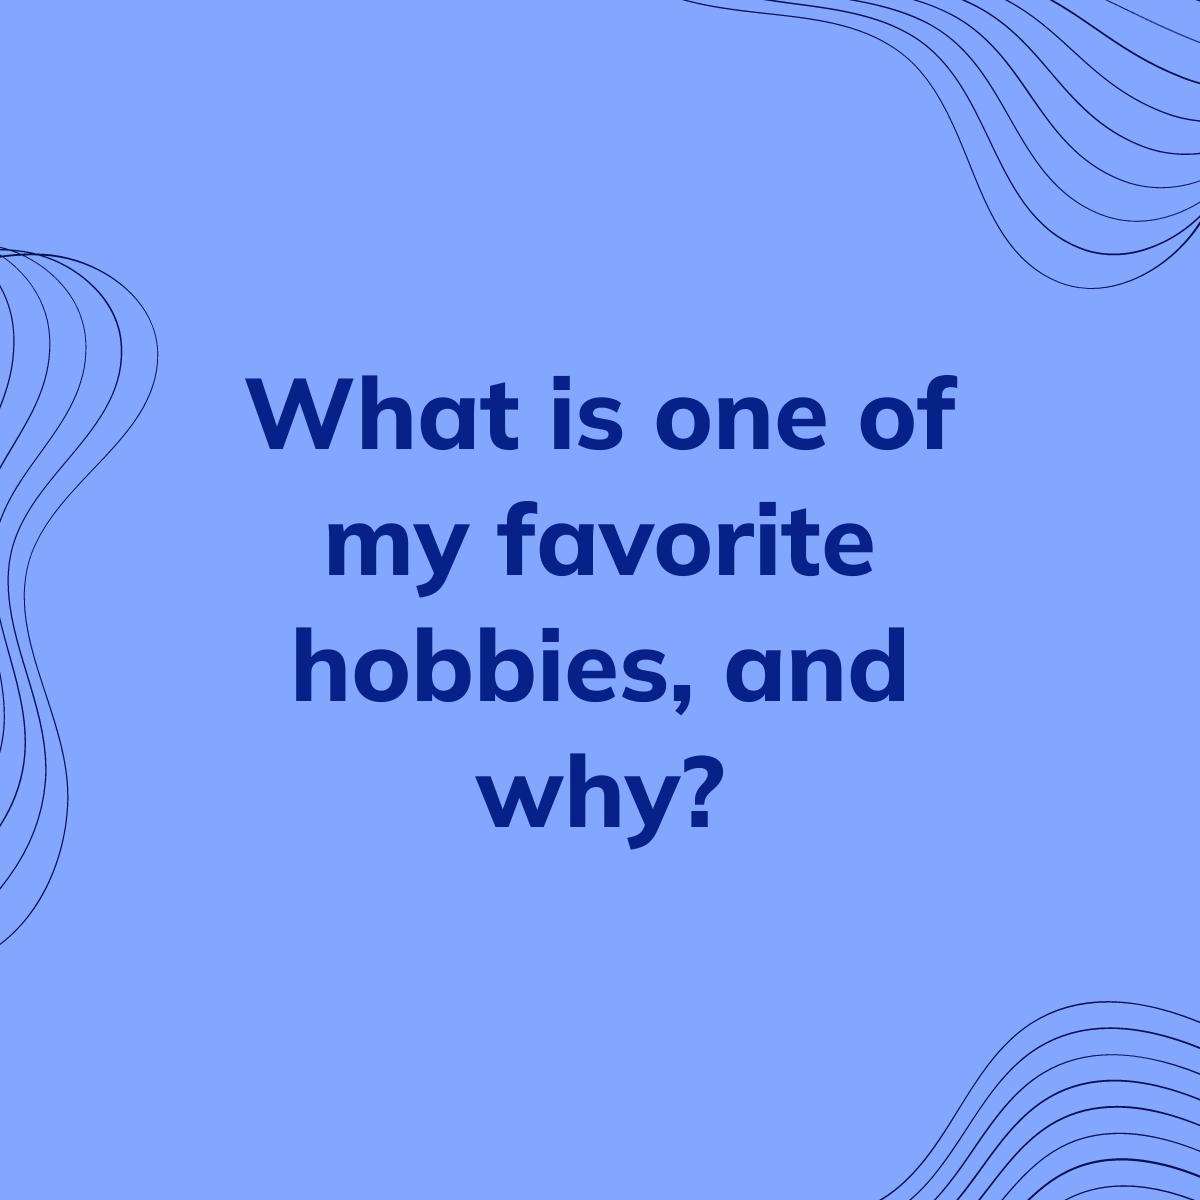 Journal Prompt: What is one of my favorite hobbies, and why?